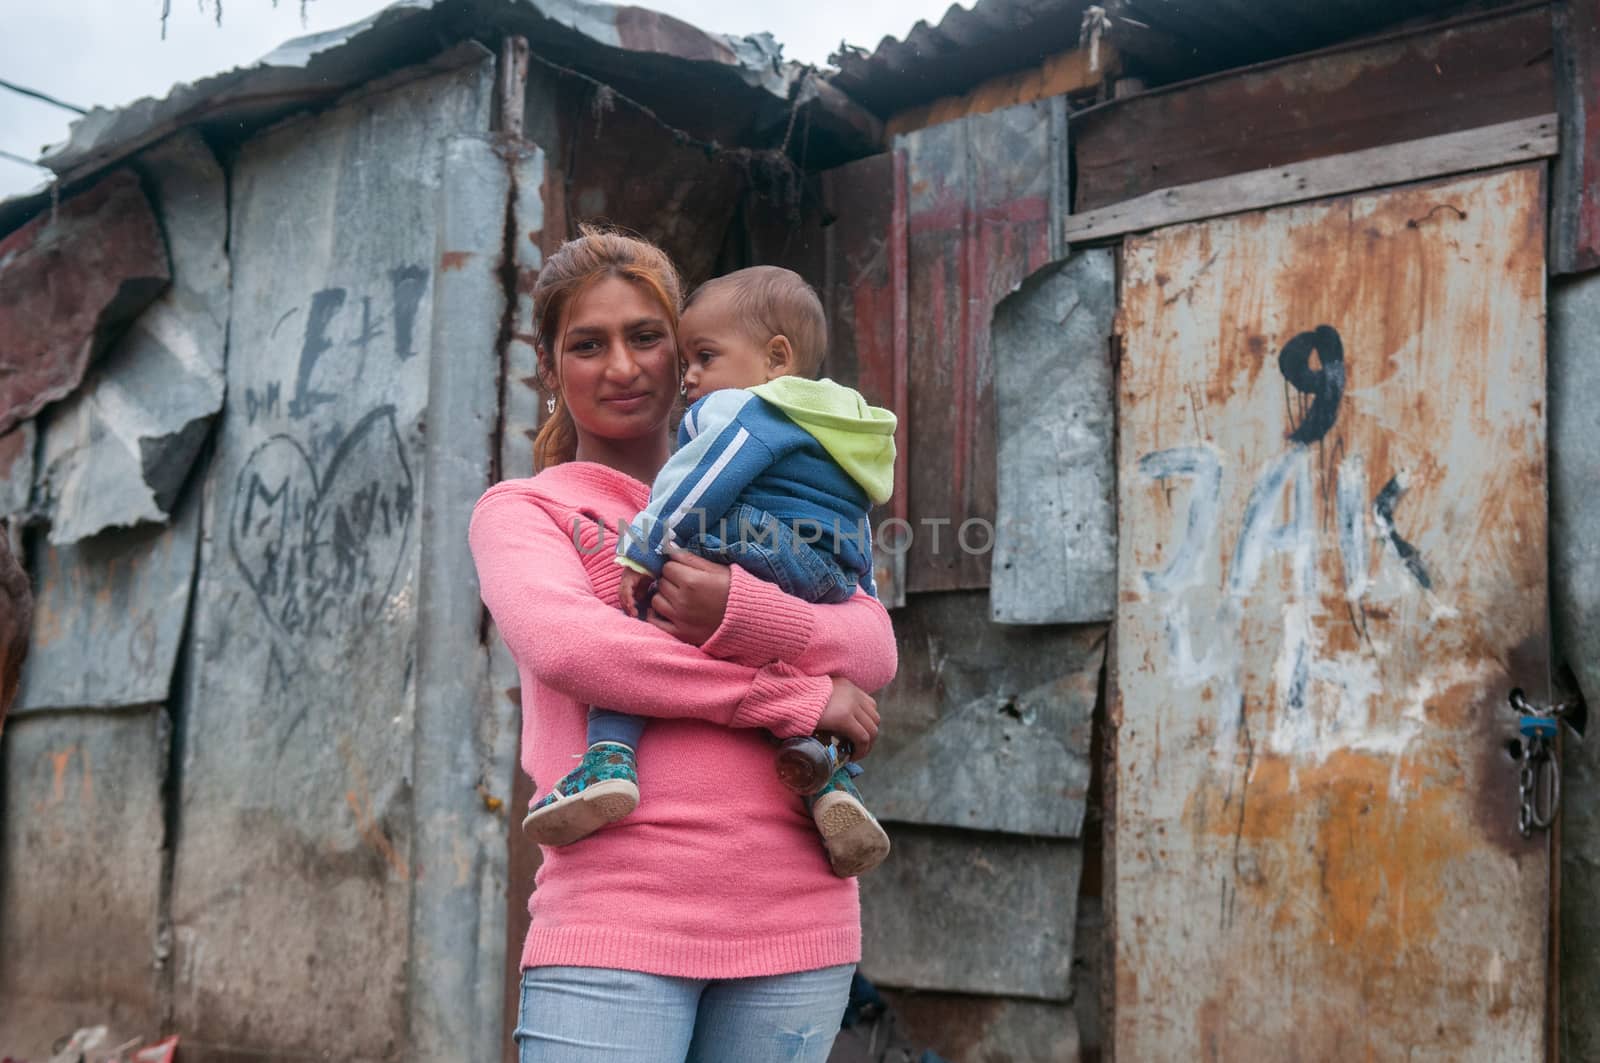 5/16/2018. Lomnicka, Slovakia. Roma community in the heart of Slovakia, living in horrible conditions. Portrait of mother and baby. by gonzalobell